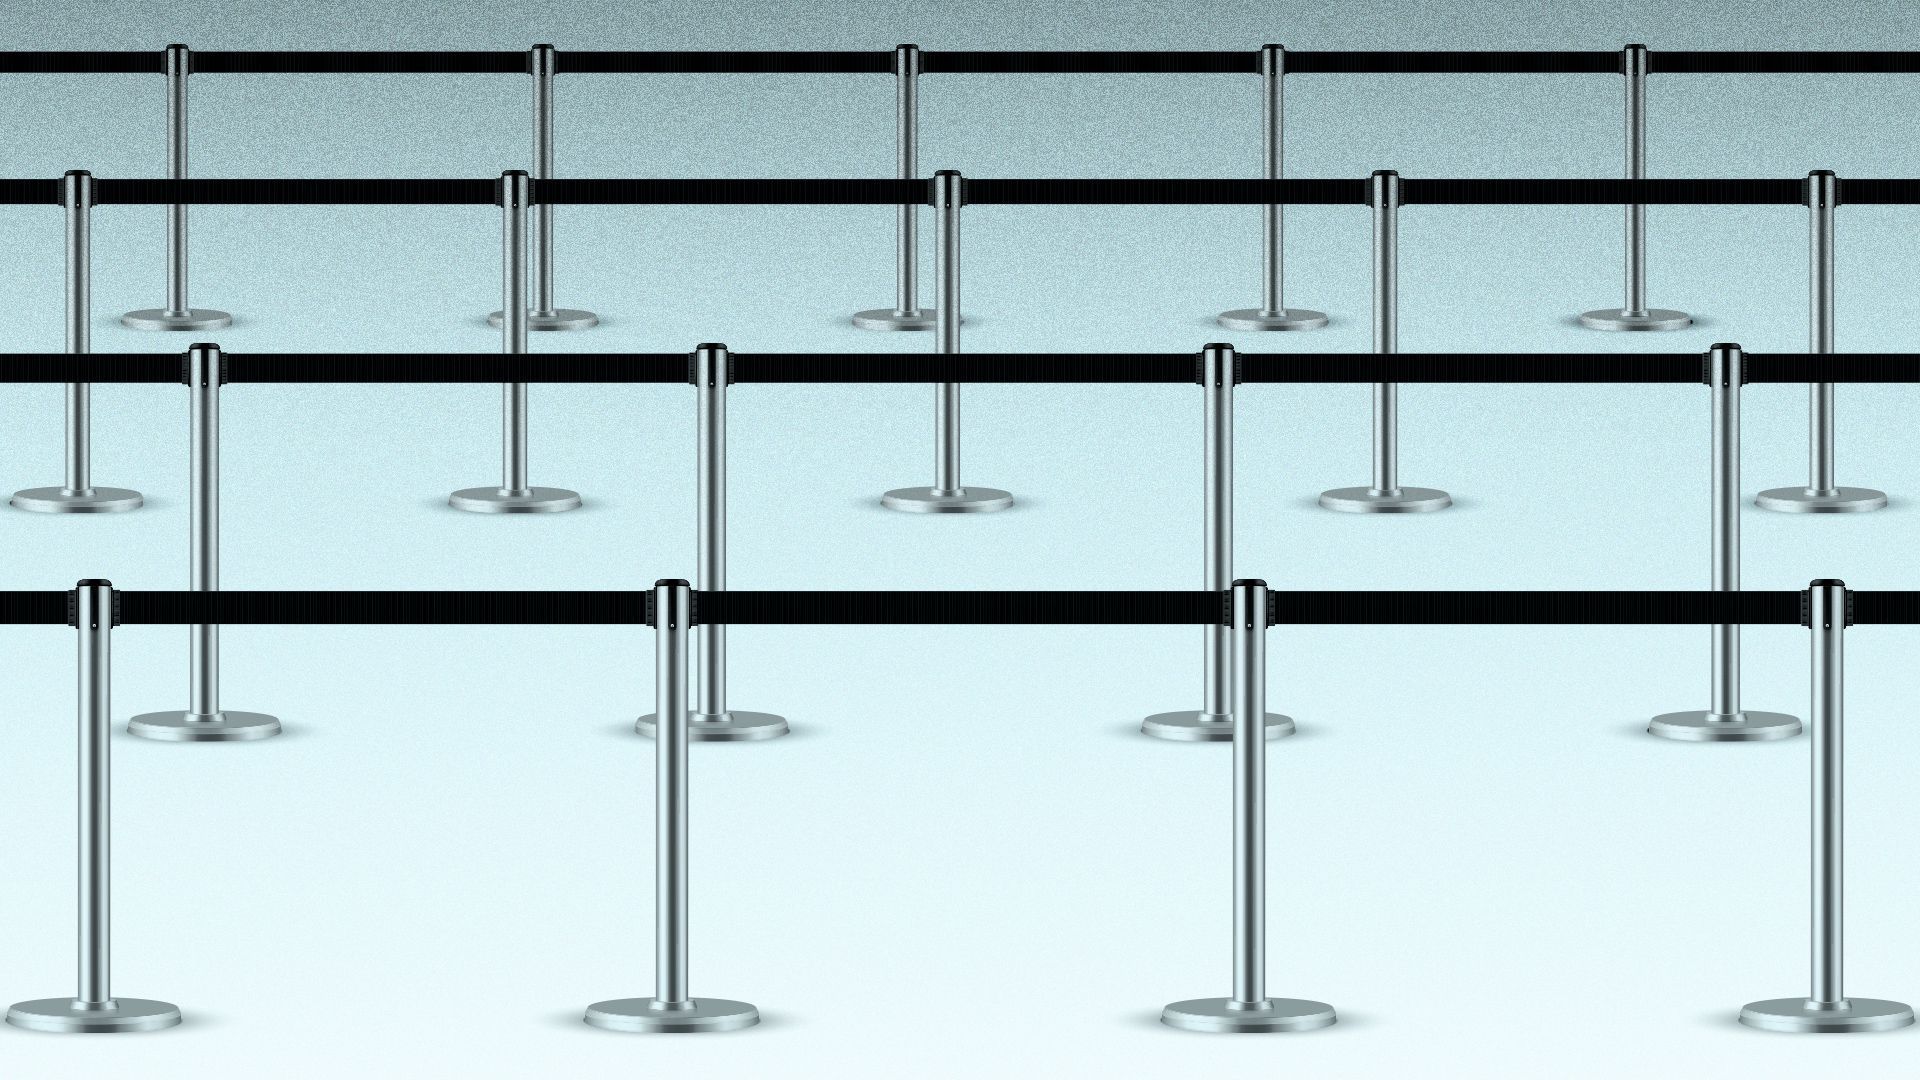 Illustration of a long line of retractable stanchions forming the area for a very long queue.